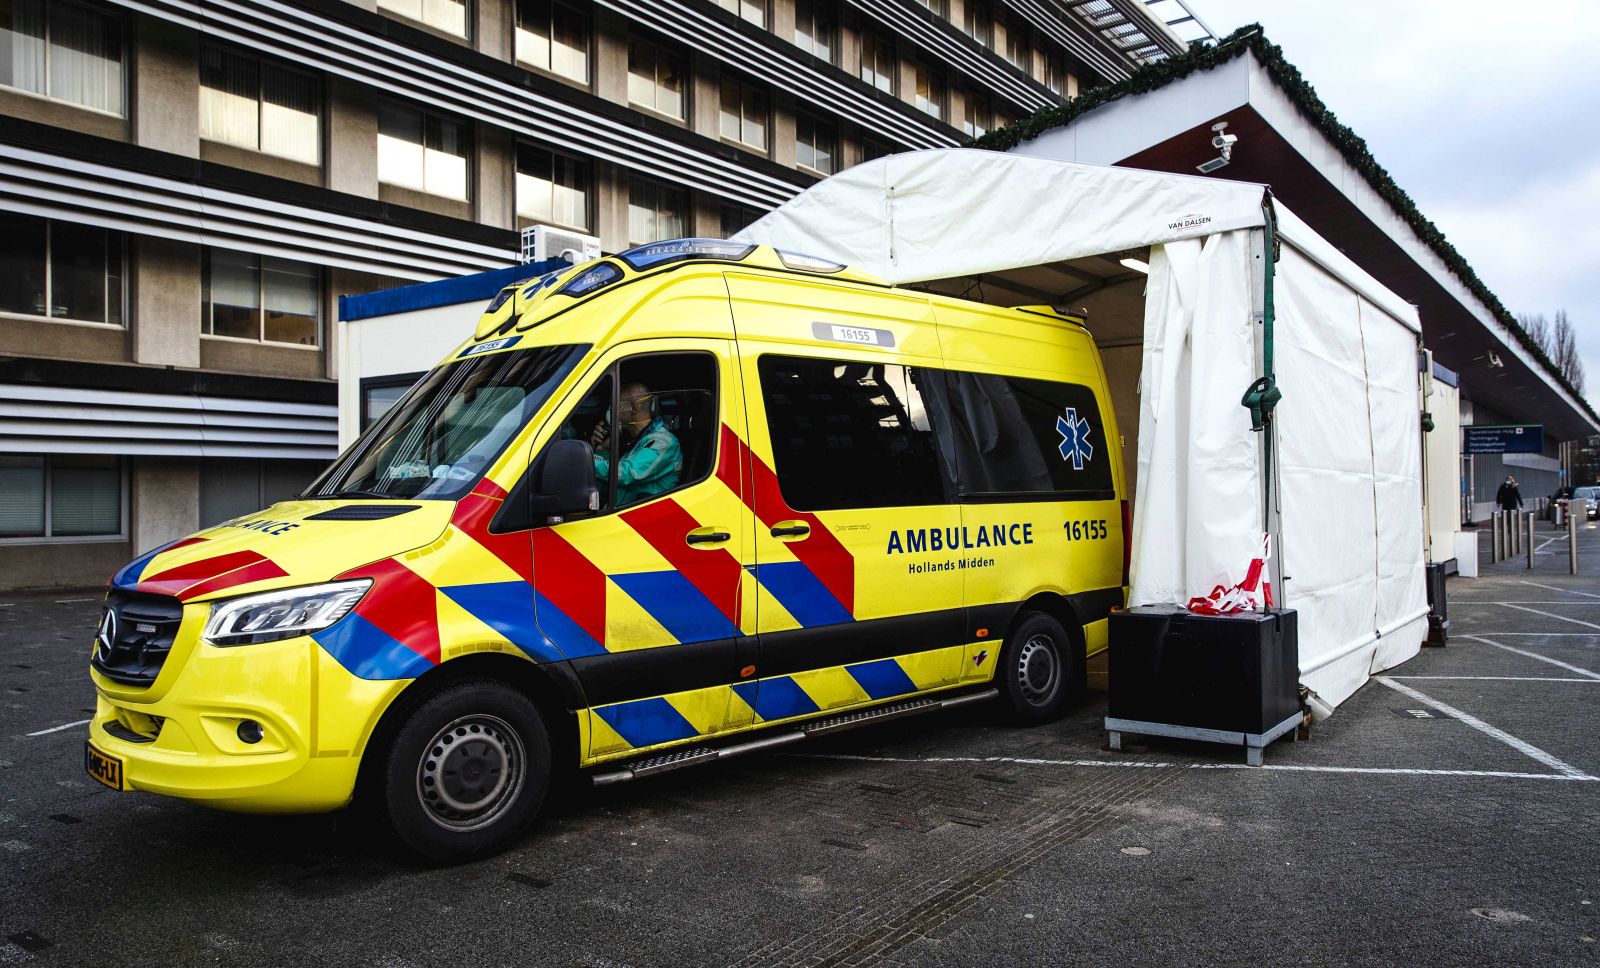 epa08889871 An ambulance at a medical cabin at the emergency department of the Groene Hart Hospital, where corona suspected patients are received in Gouda, the Netherlands, 17 December 2020. The temporary cabin is to separate patients with and without corona as they are admissioned to the hospital.  EPA/SEM VAN DER WAL